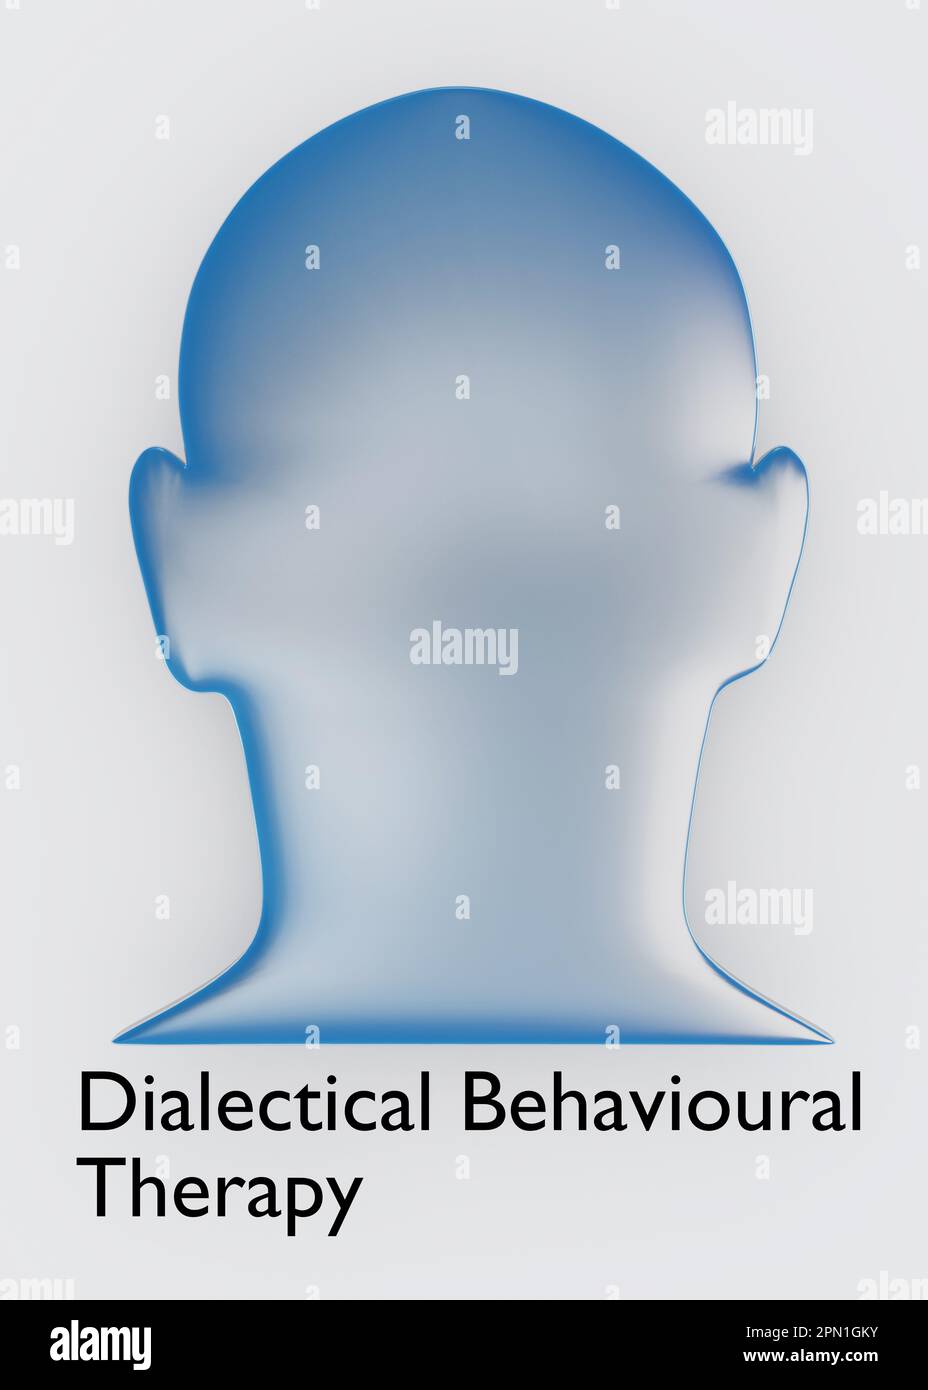 3D illustration of a gray head silhouette titled as Dialectical Behavioural Therapy, isolated over light gray background. Stock Photo